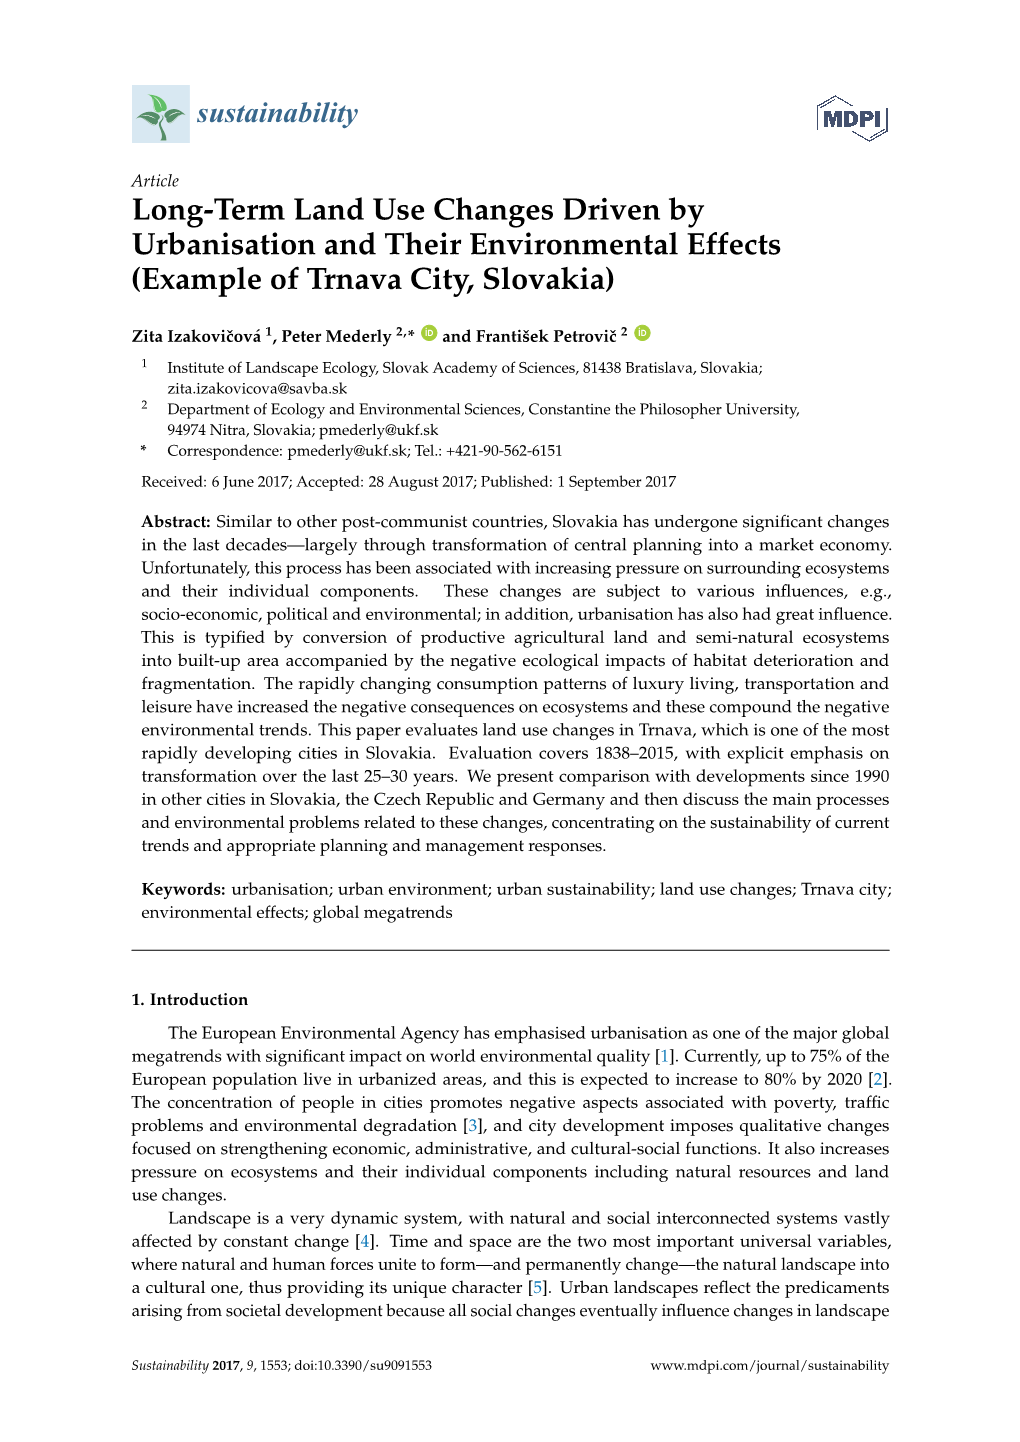 Long-Term Land Use Changes Driven by Urbanisation and Their Environmental Effects (Example of Trnava City, Slovakia)